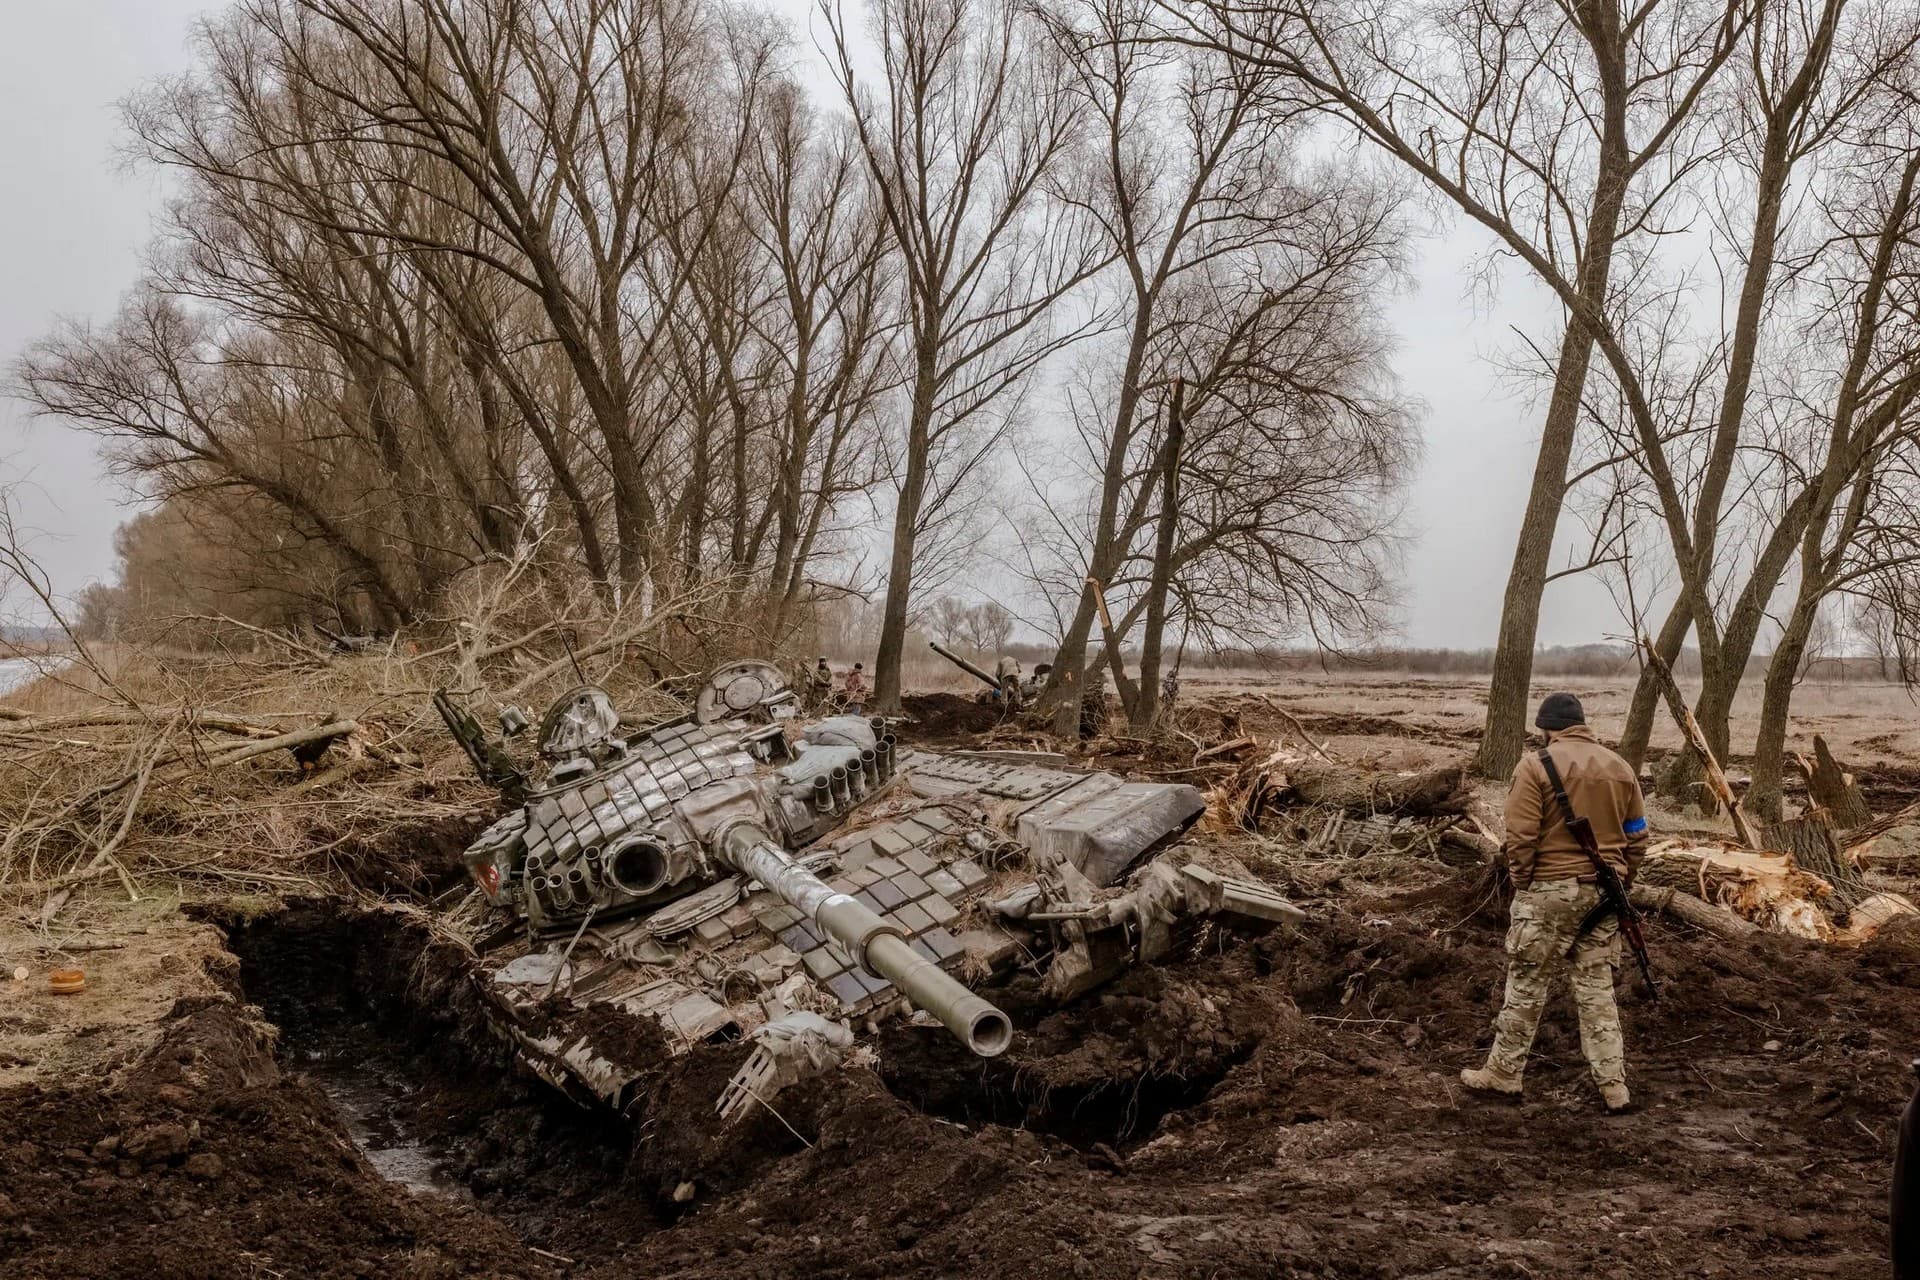 A Russian tank stuck in the mud in the village of Zavorychi (Brovary Raion) outside the Ukrainian capital of Kyiv